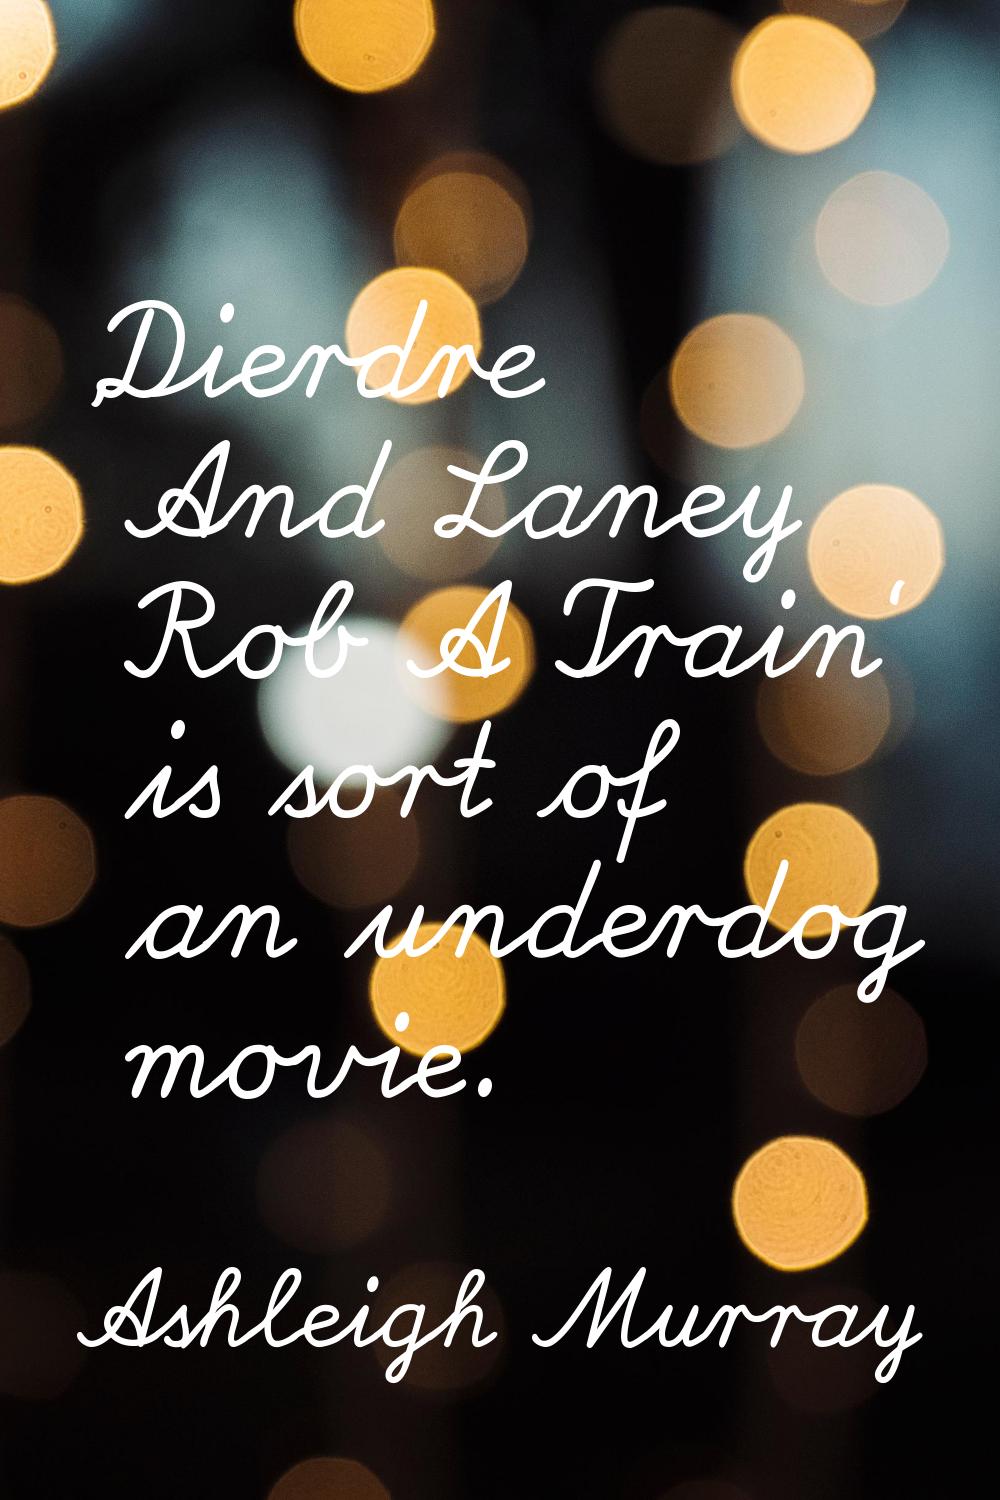 'Dierdre And Laney Rob A Train' is sort of an underdog movie.